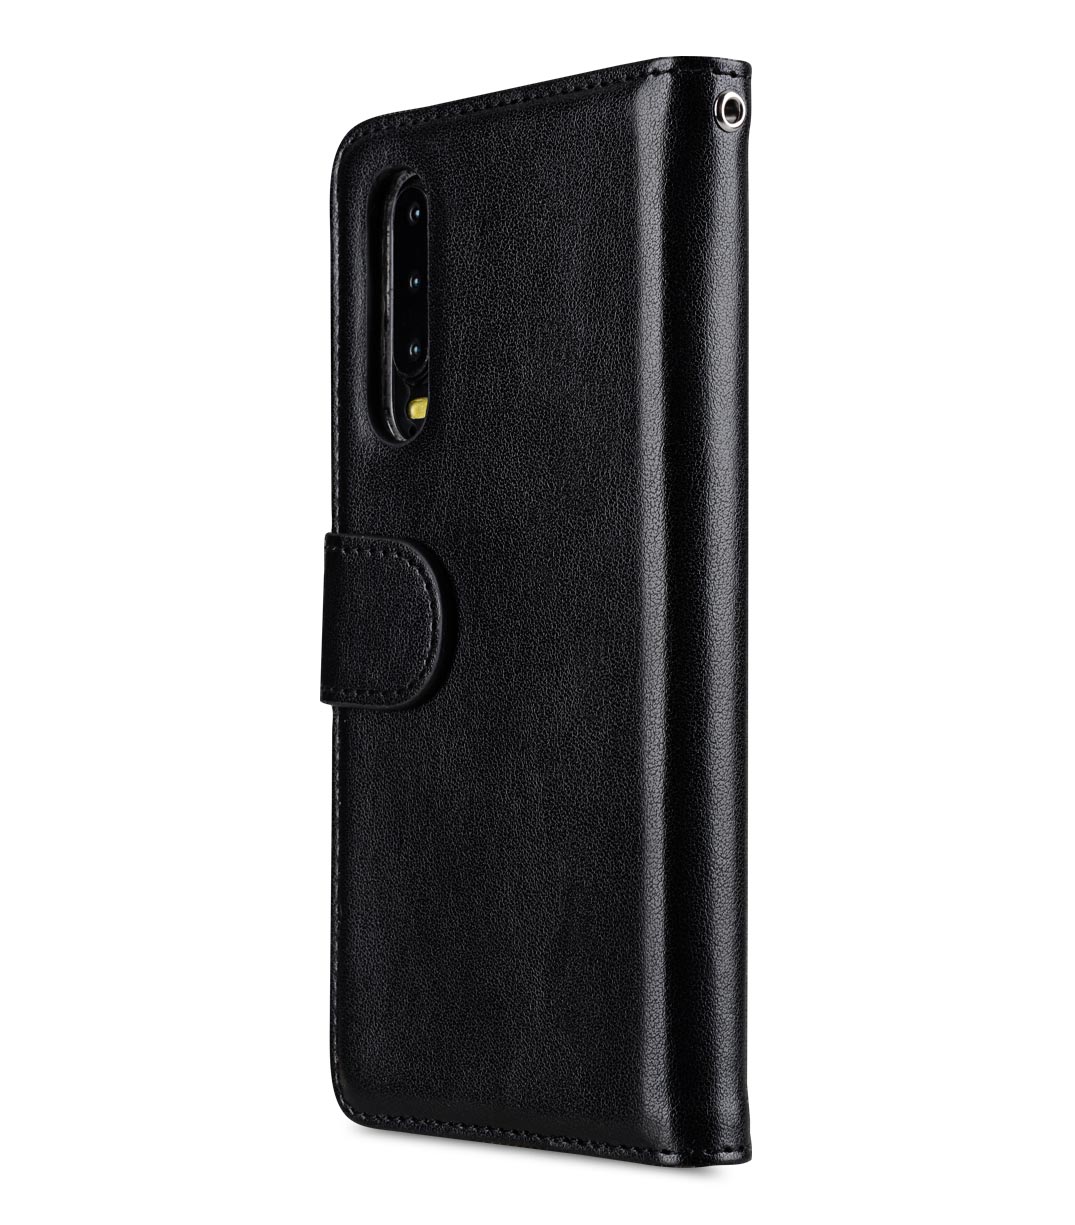 Melkco Wallet Book Series PU Leather Wallet Book Clear Type Case for Huawei P30 - ( Black )